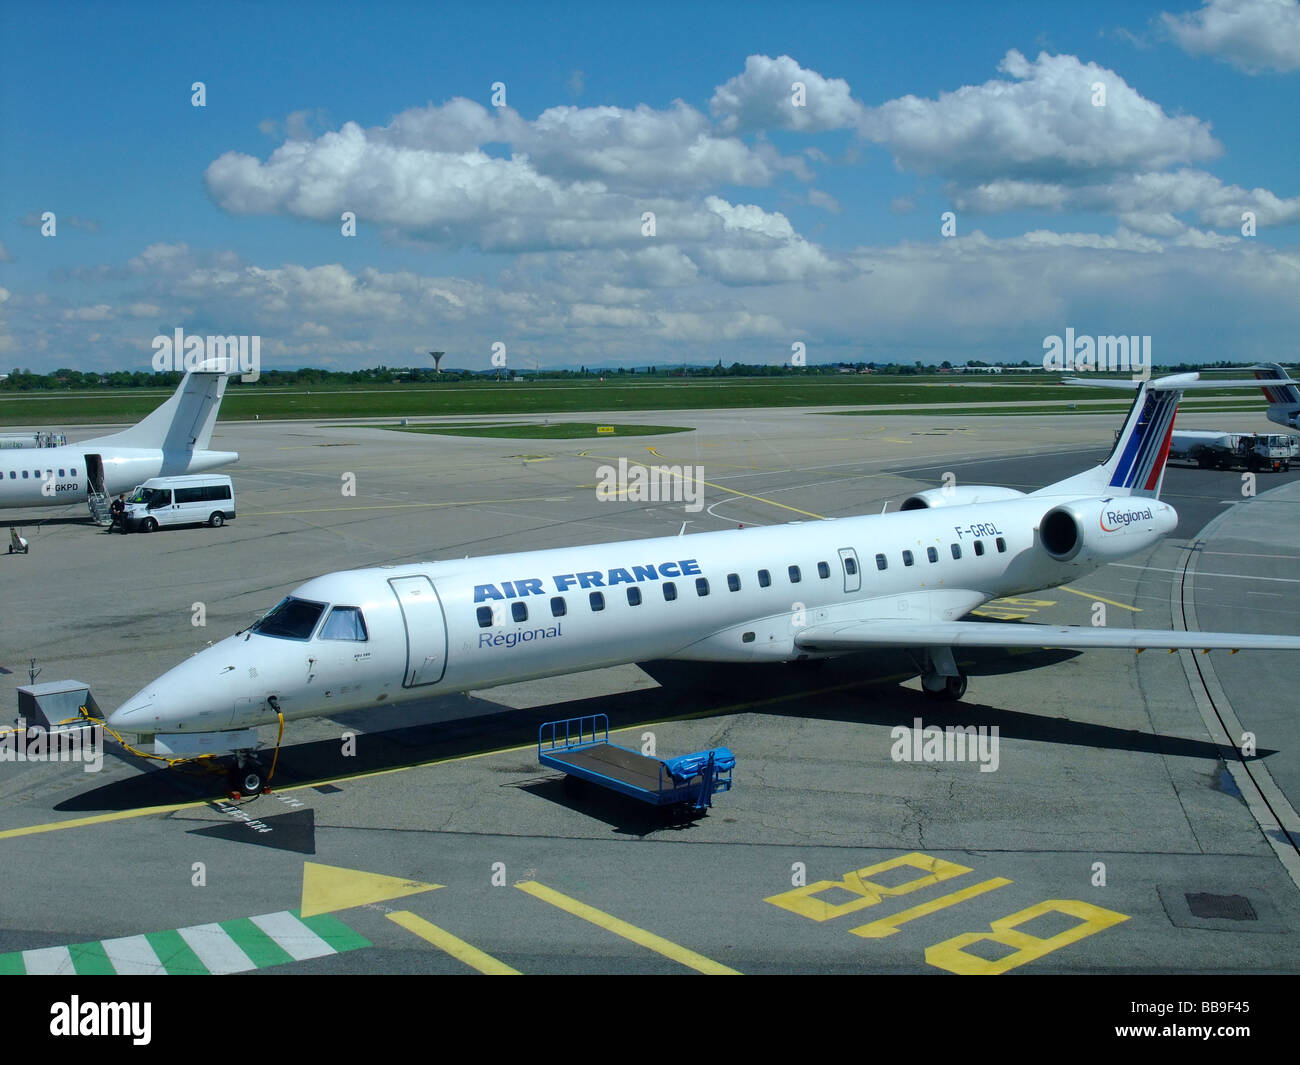 Embraer ERJ-145 regional jet of the company Regional (flying for Air France) on the parking at Lyon Saint Exupery airport Stock Photo